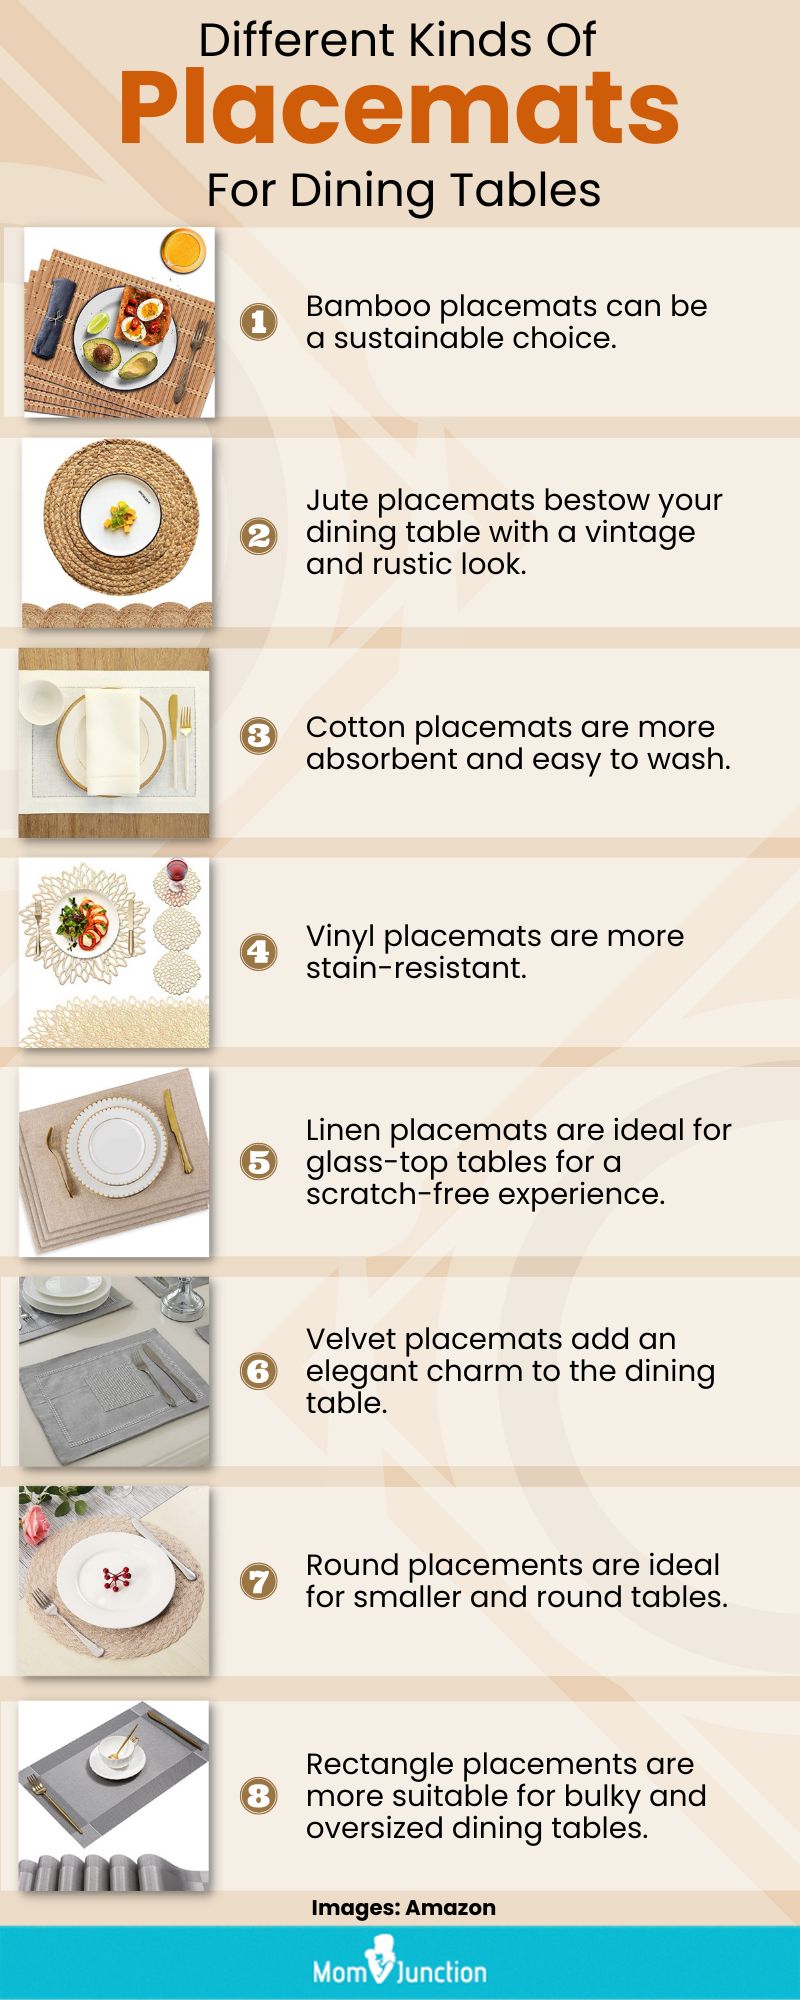 Different Kinds Of Placemats For Dining Tables (infographic)